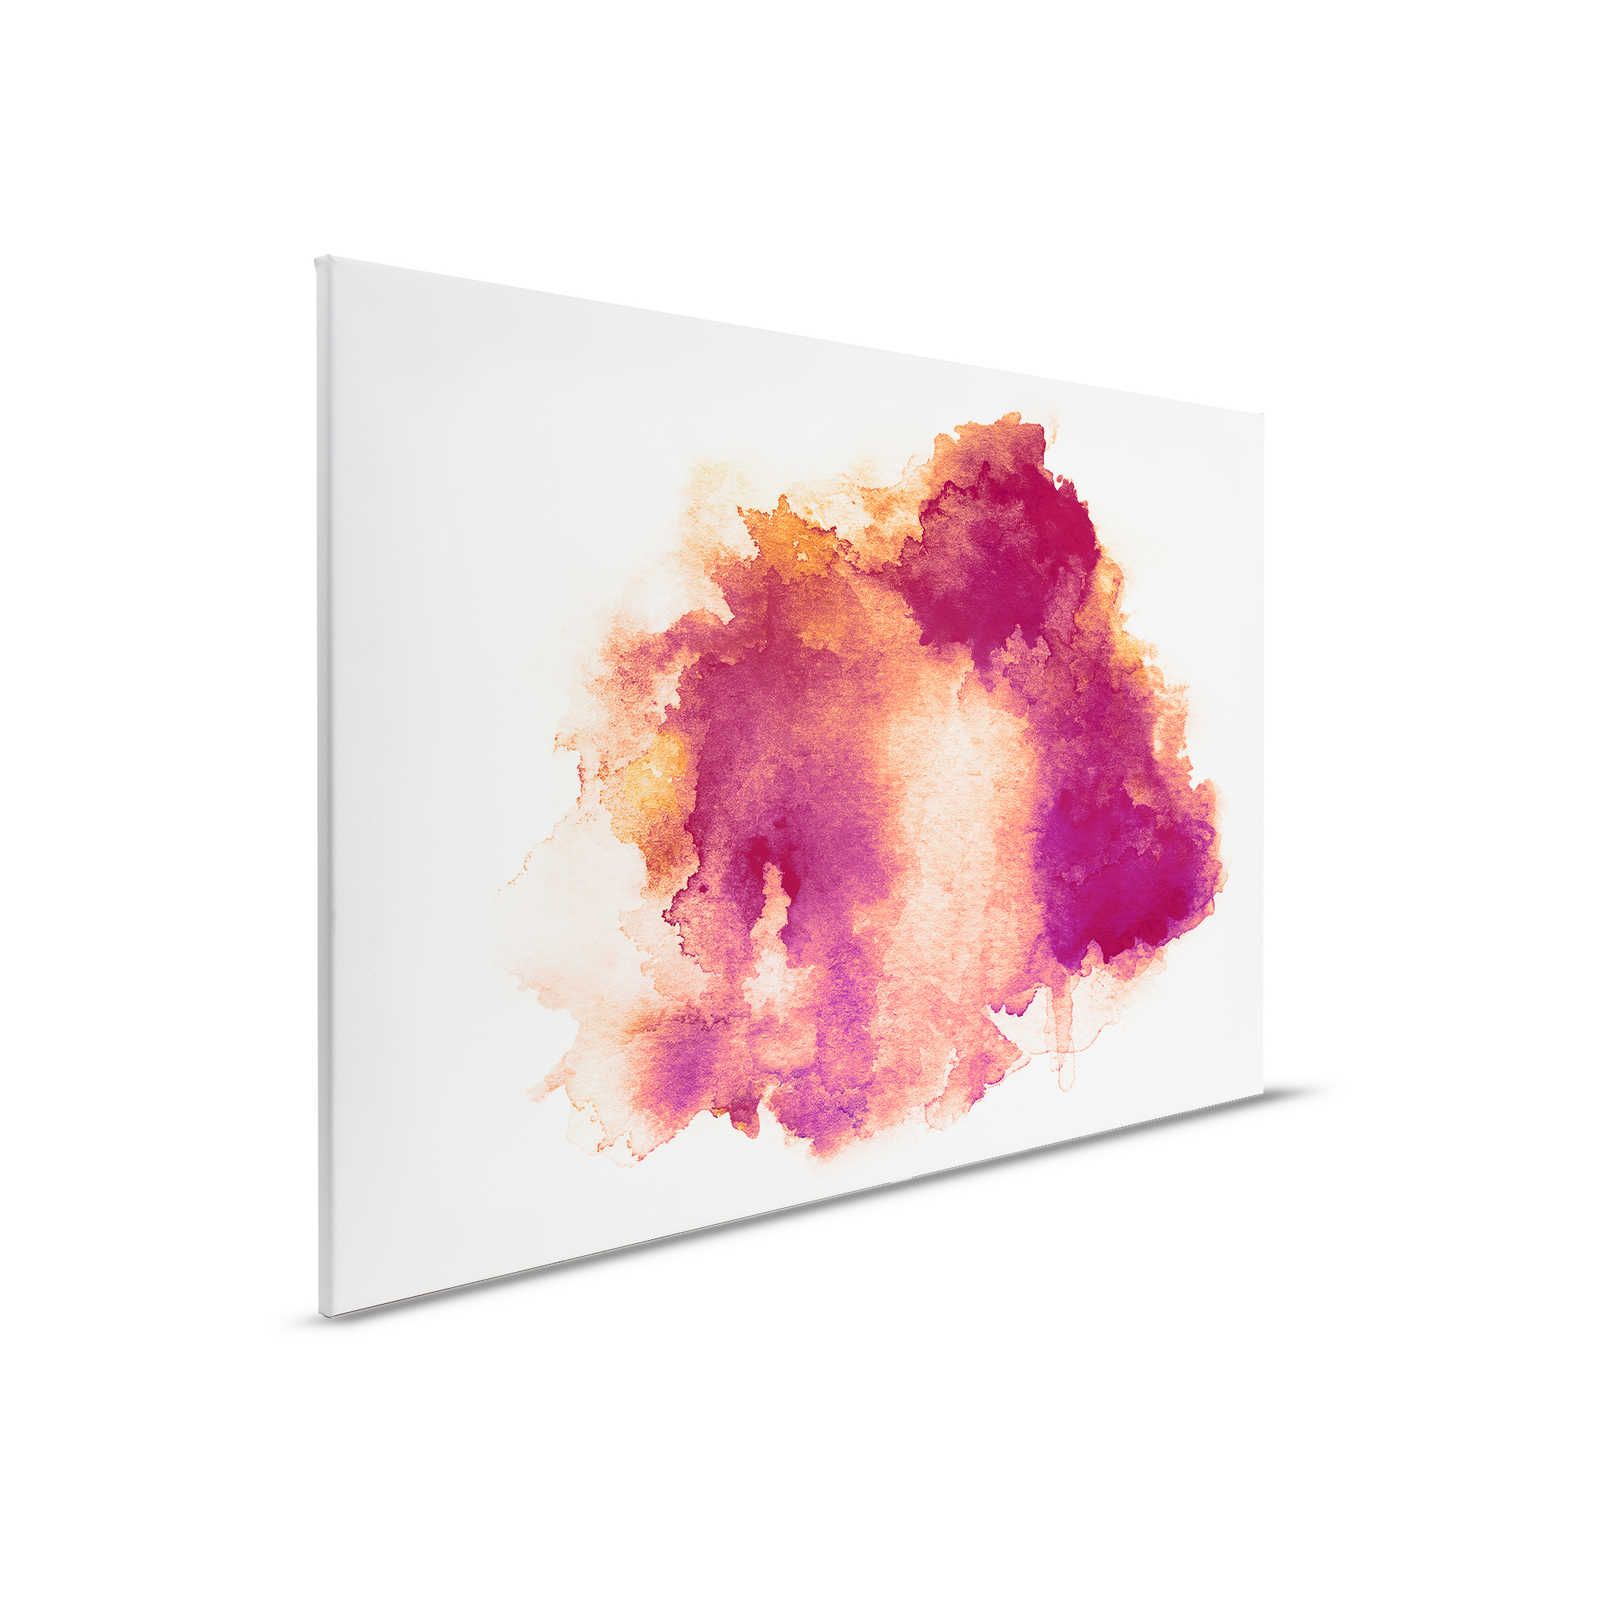         Canvas painting Watercolour Spot Red with Gradient - 0,90 m x 0,60 m
    